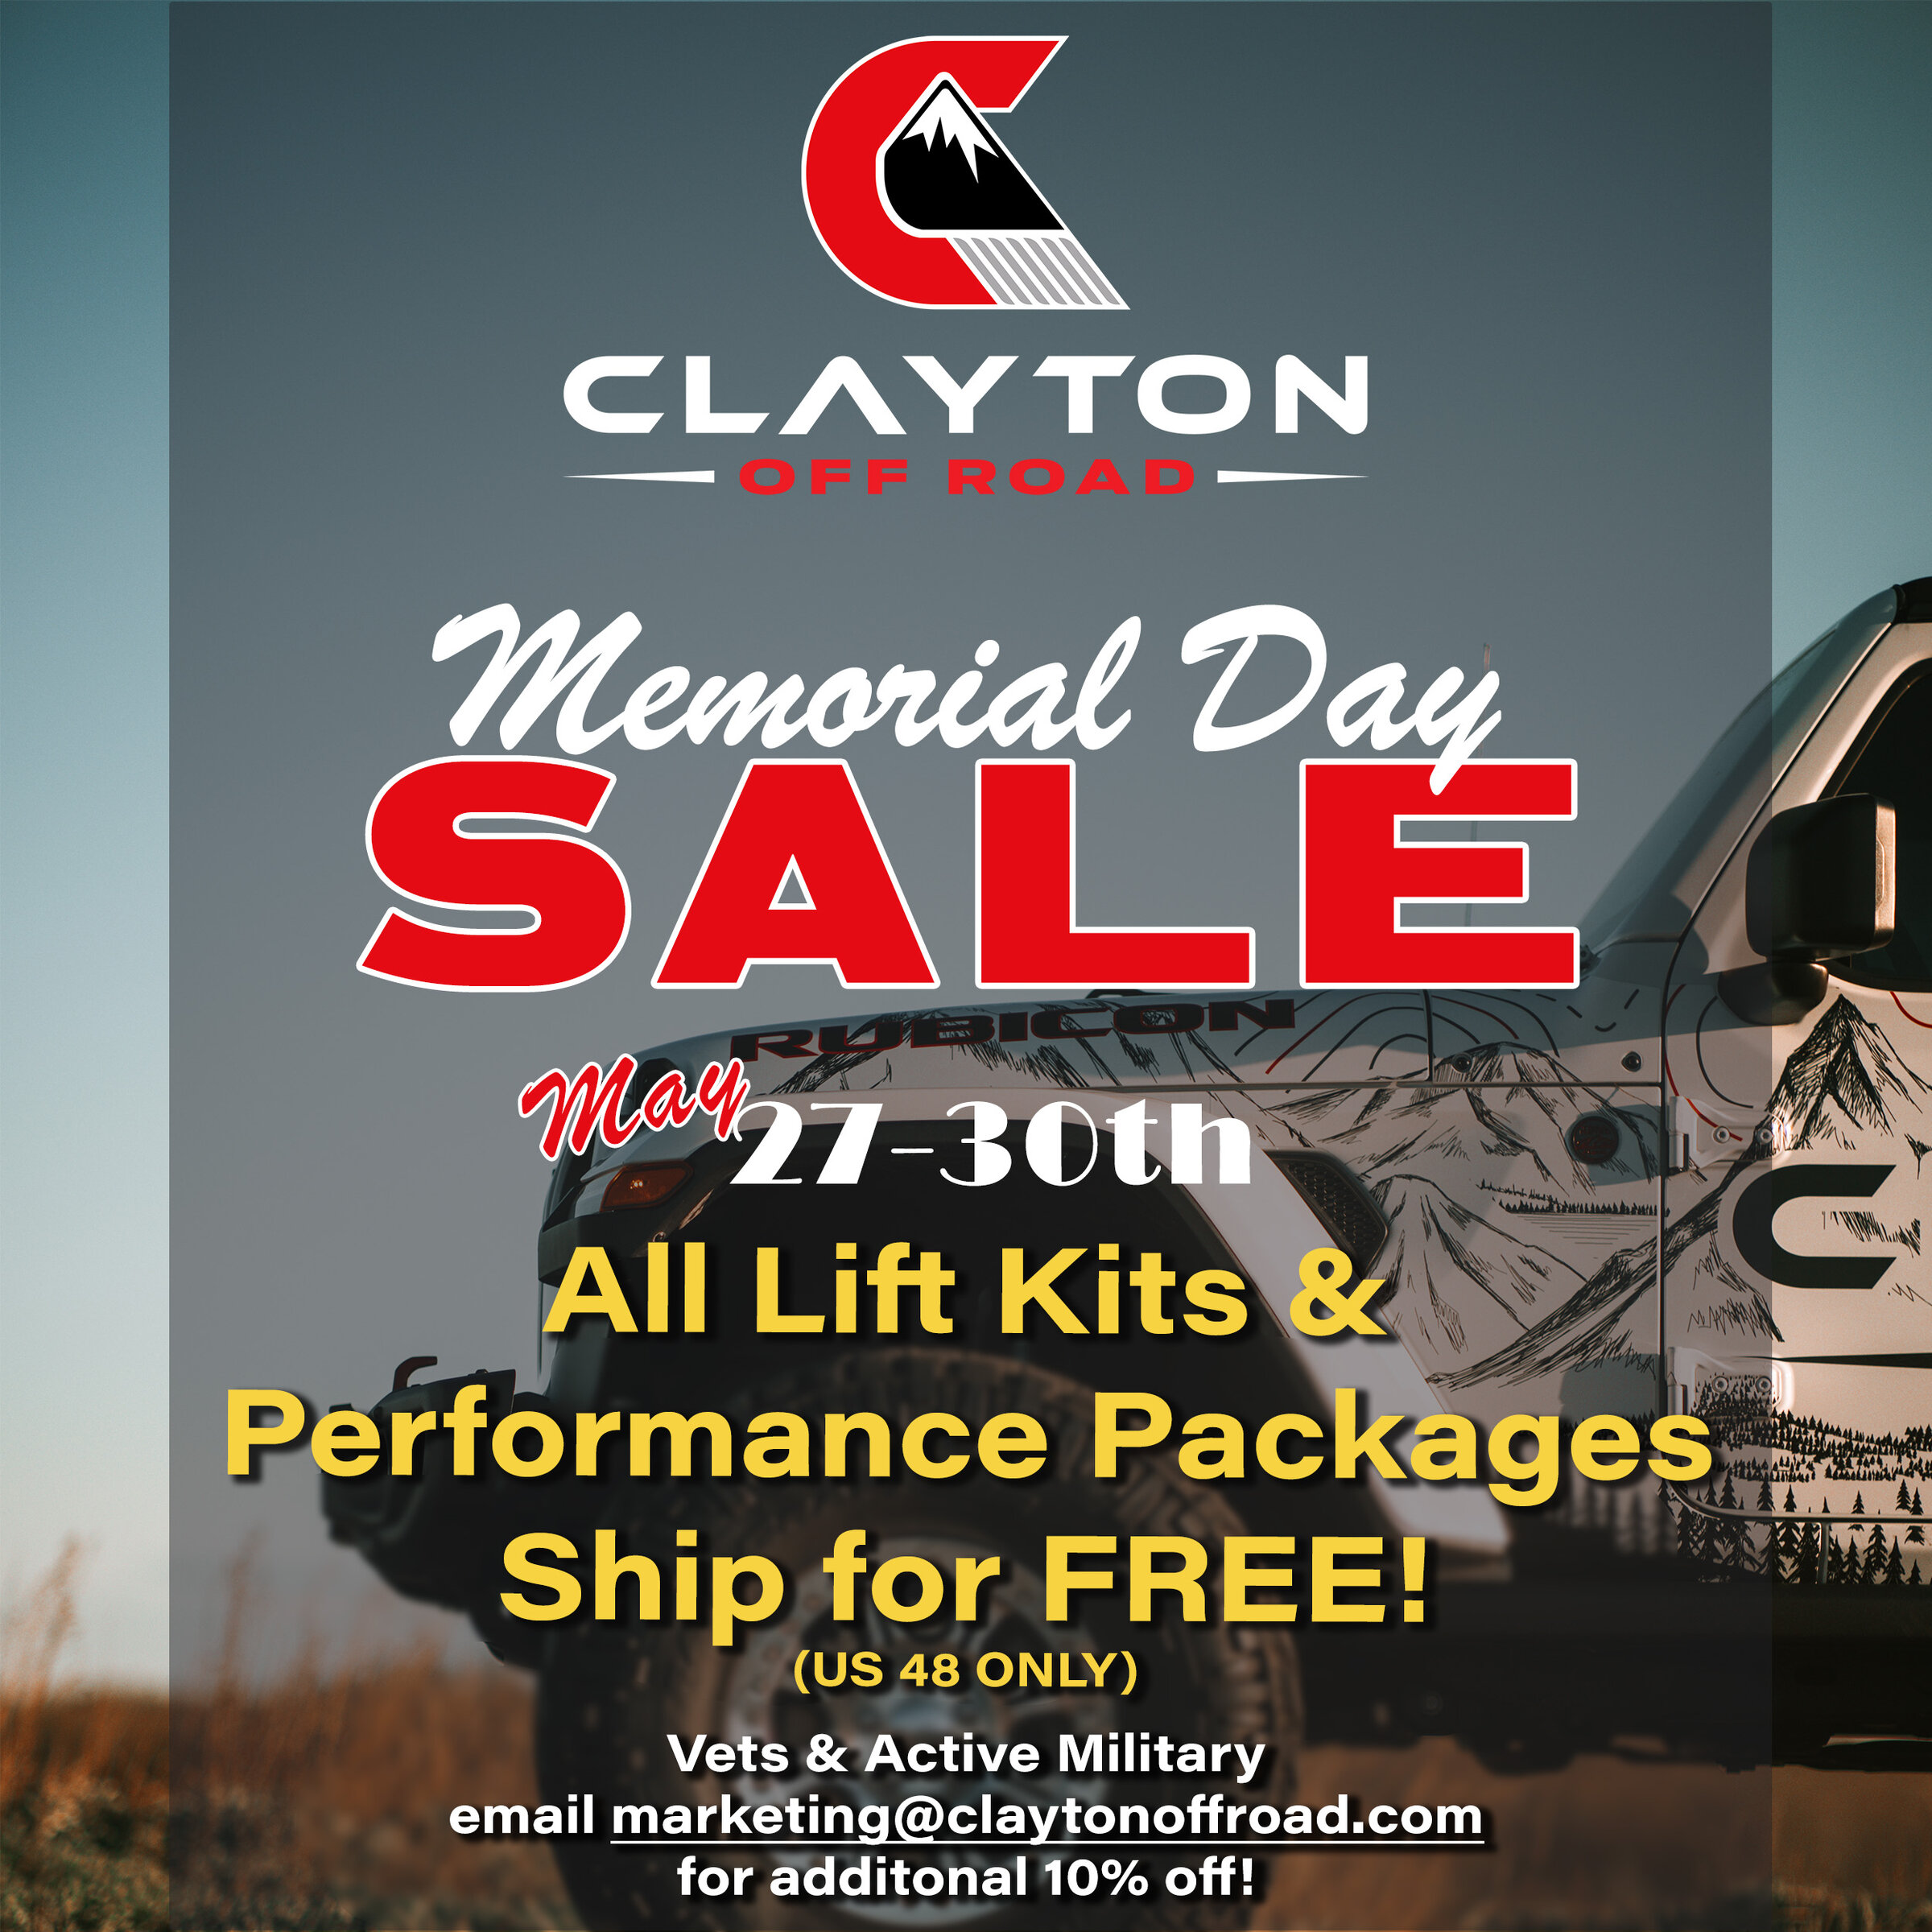 Jeep Gladiator Clayton Off Road Memorial Day Weekend Sale! memorial day 2022